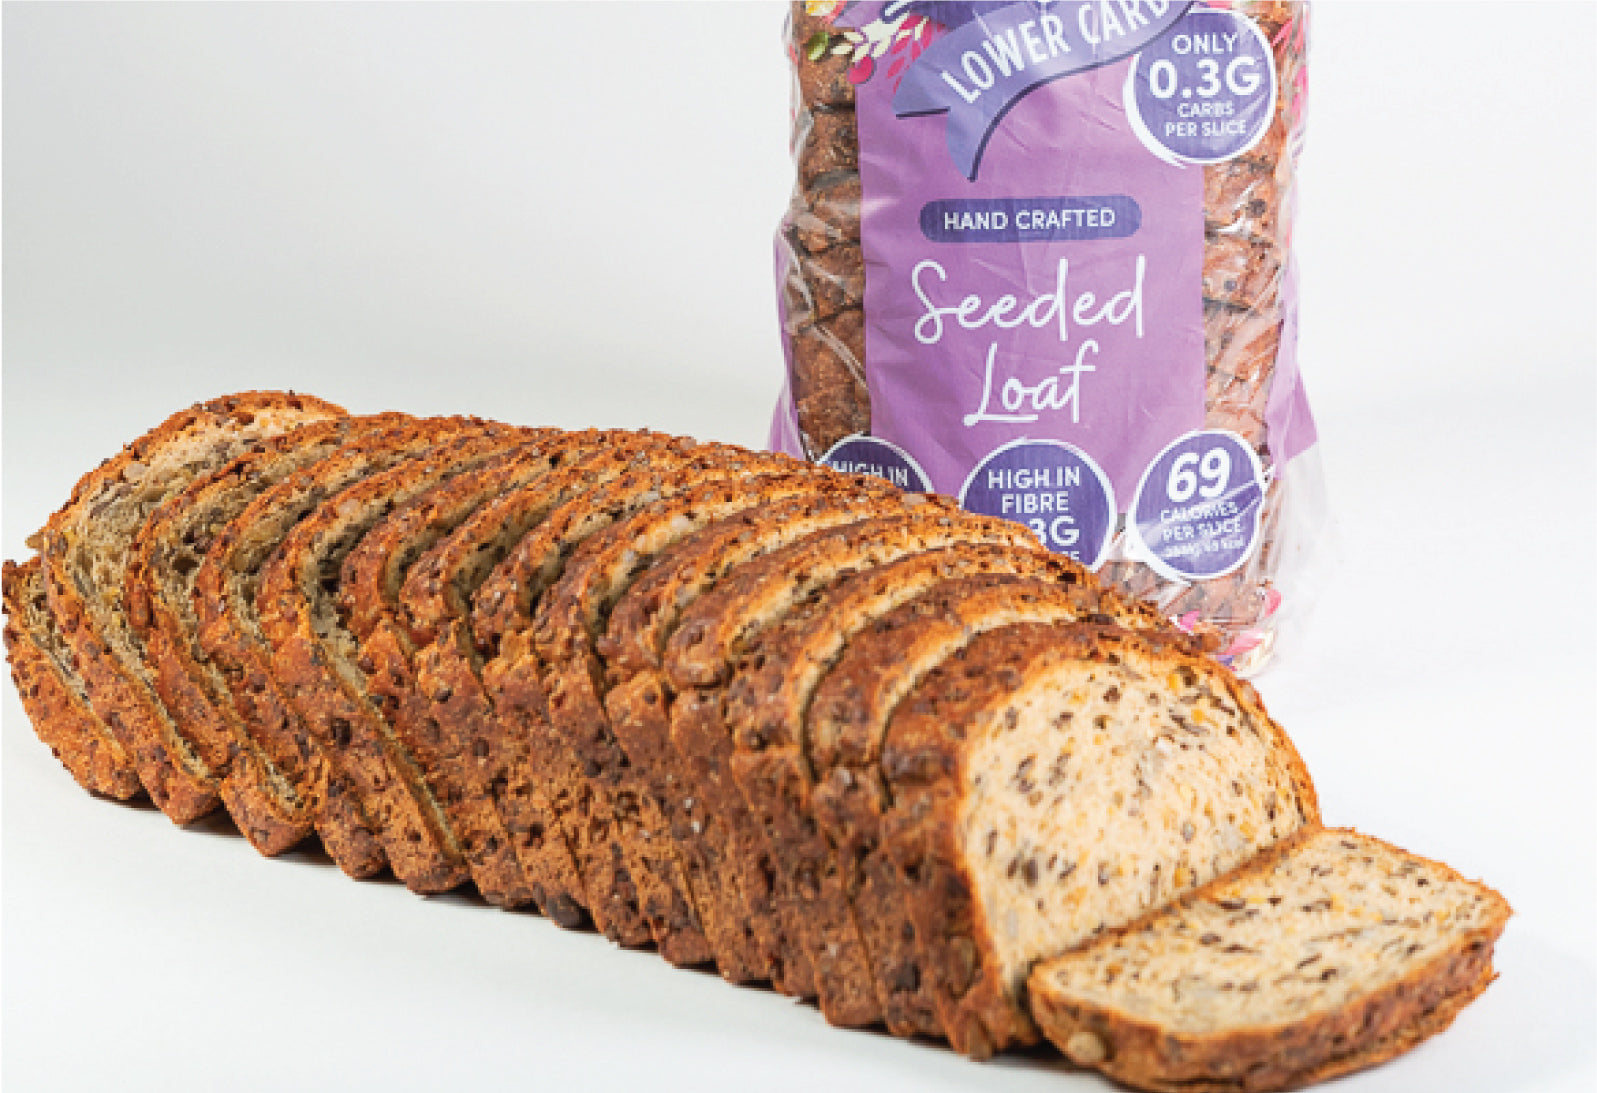 Lowest carb bread